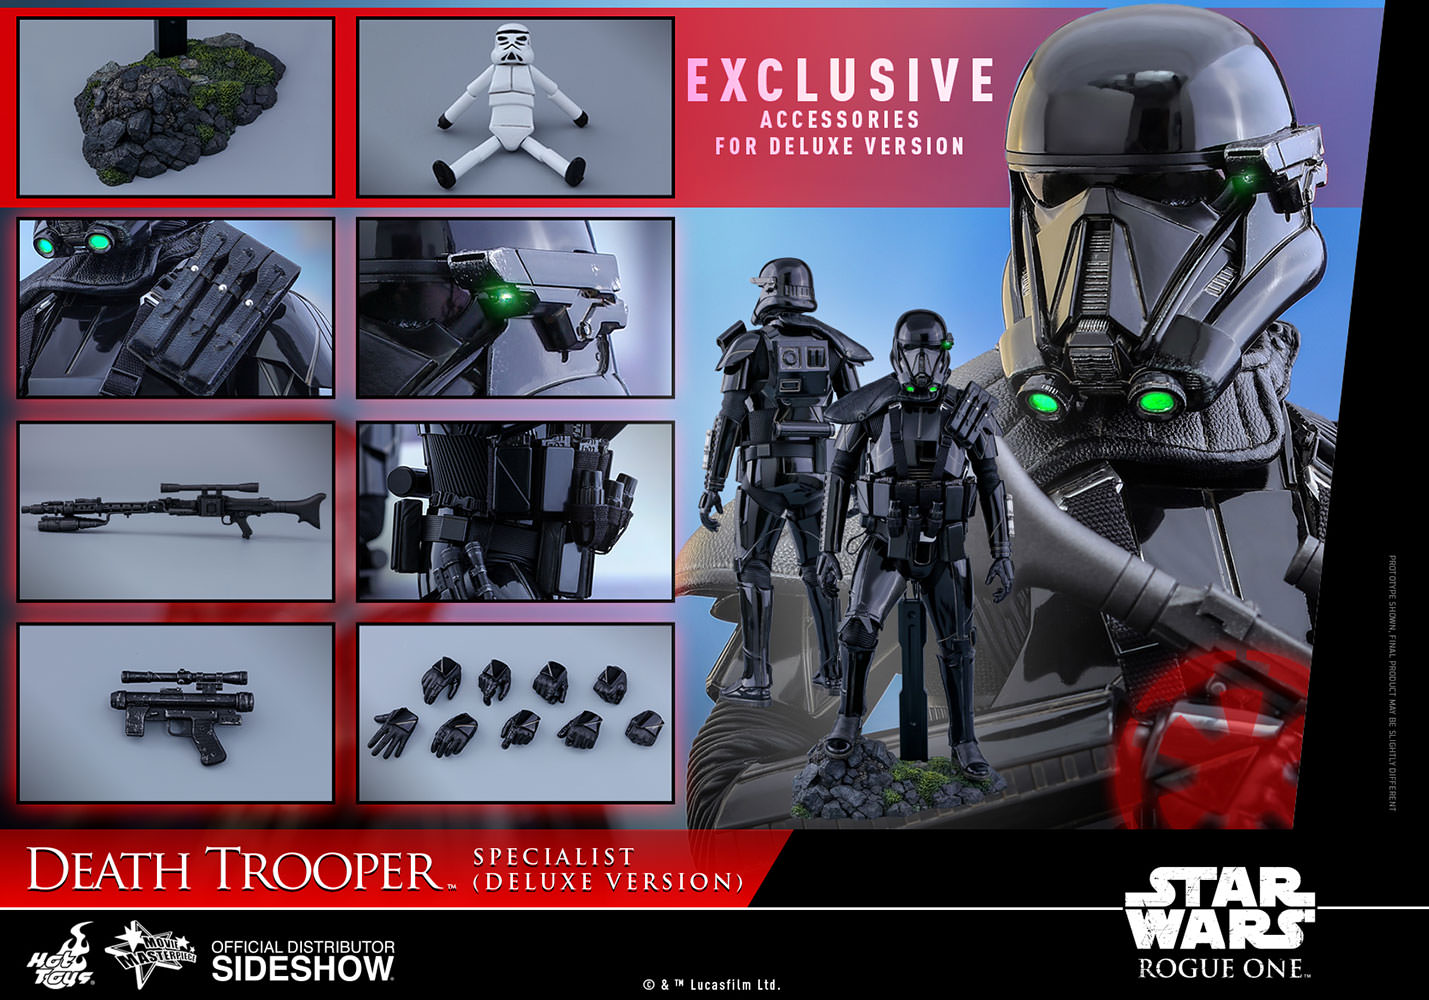 star-wars-rogue-one-death-trooper-specialist-deluxe-version-hot-toys-feature-HT-product-902906-15.jpg